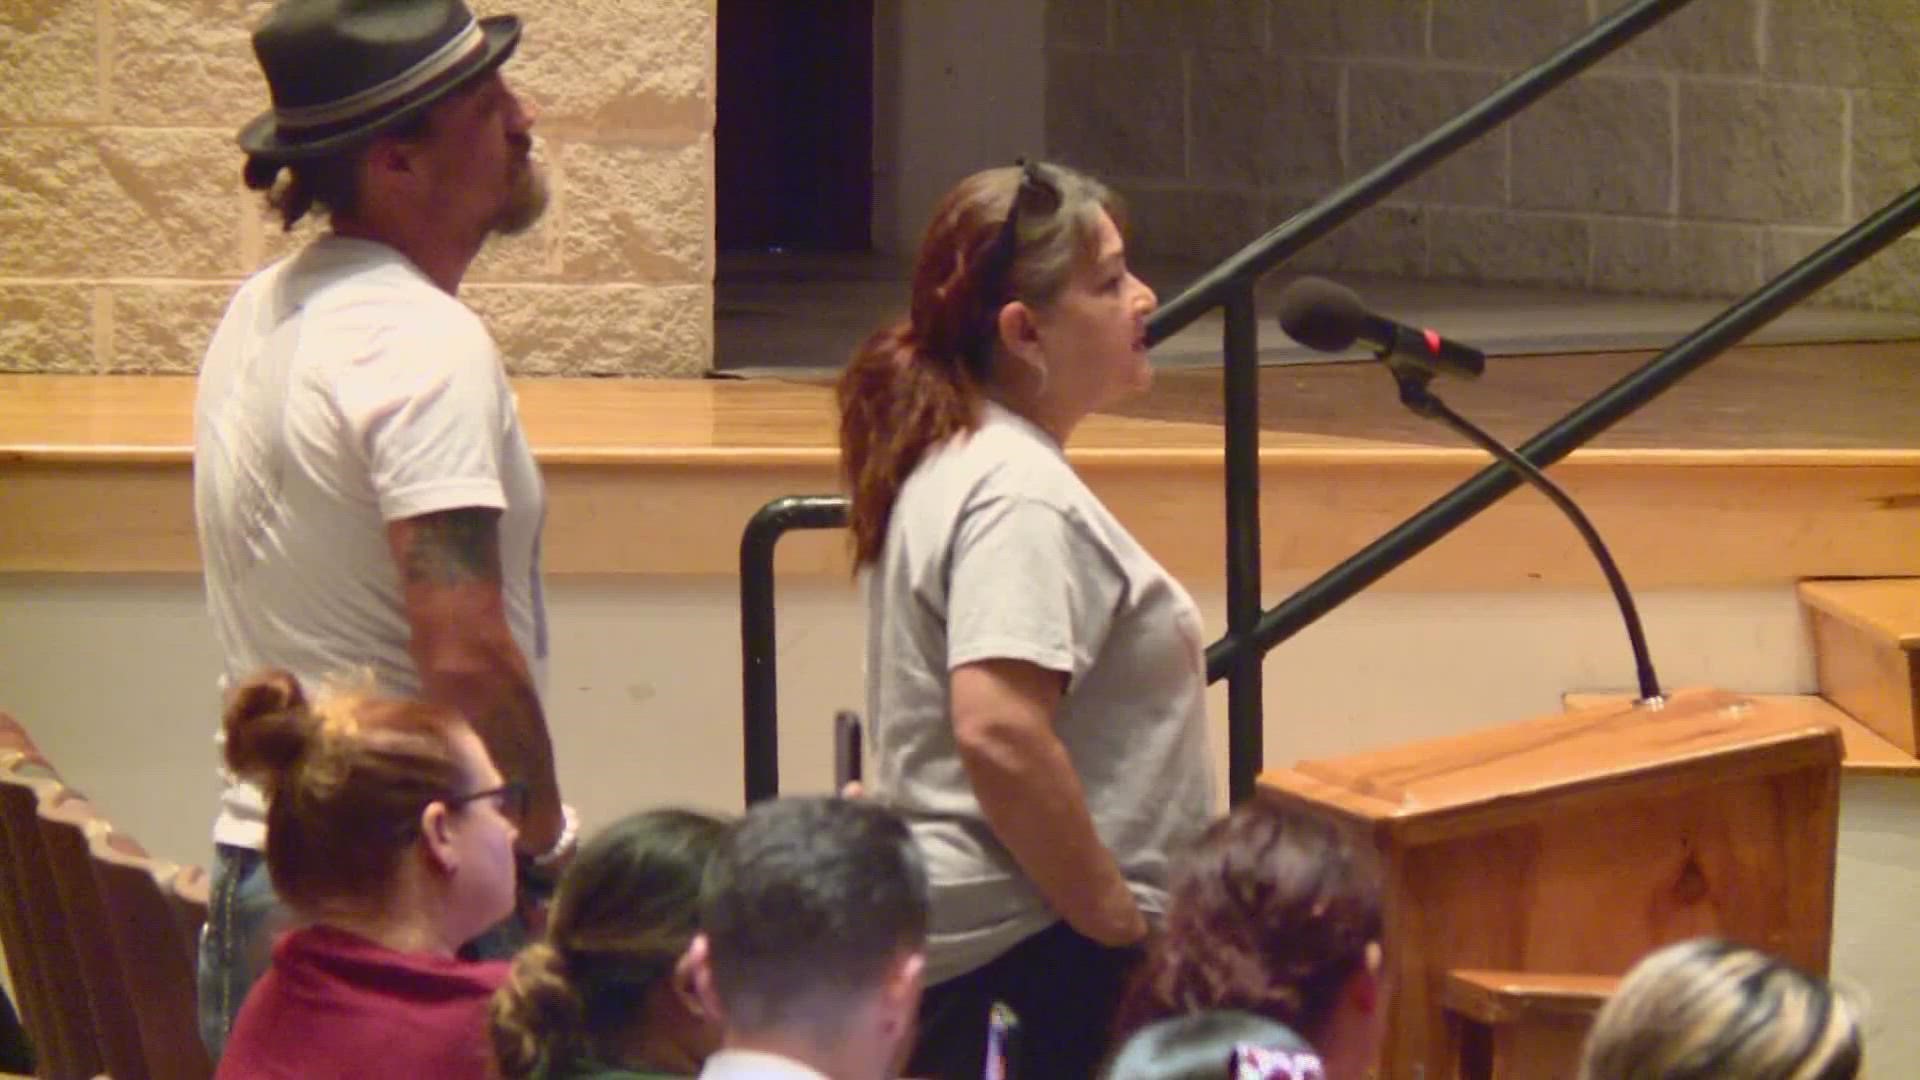 Parents with children in UCISD schools said they were angry the school district has not yet audited its own police department.